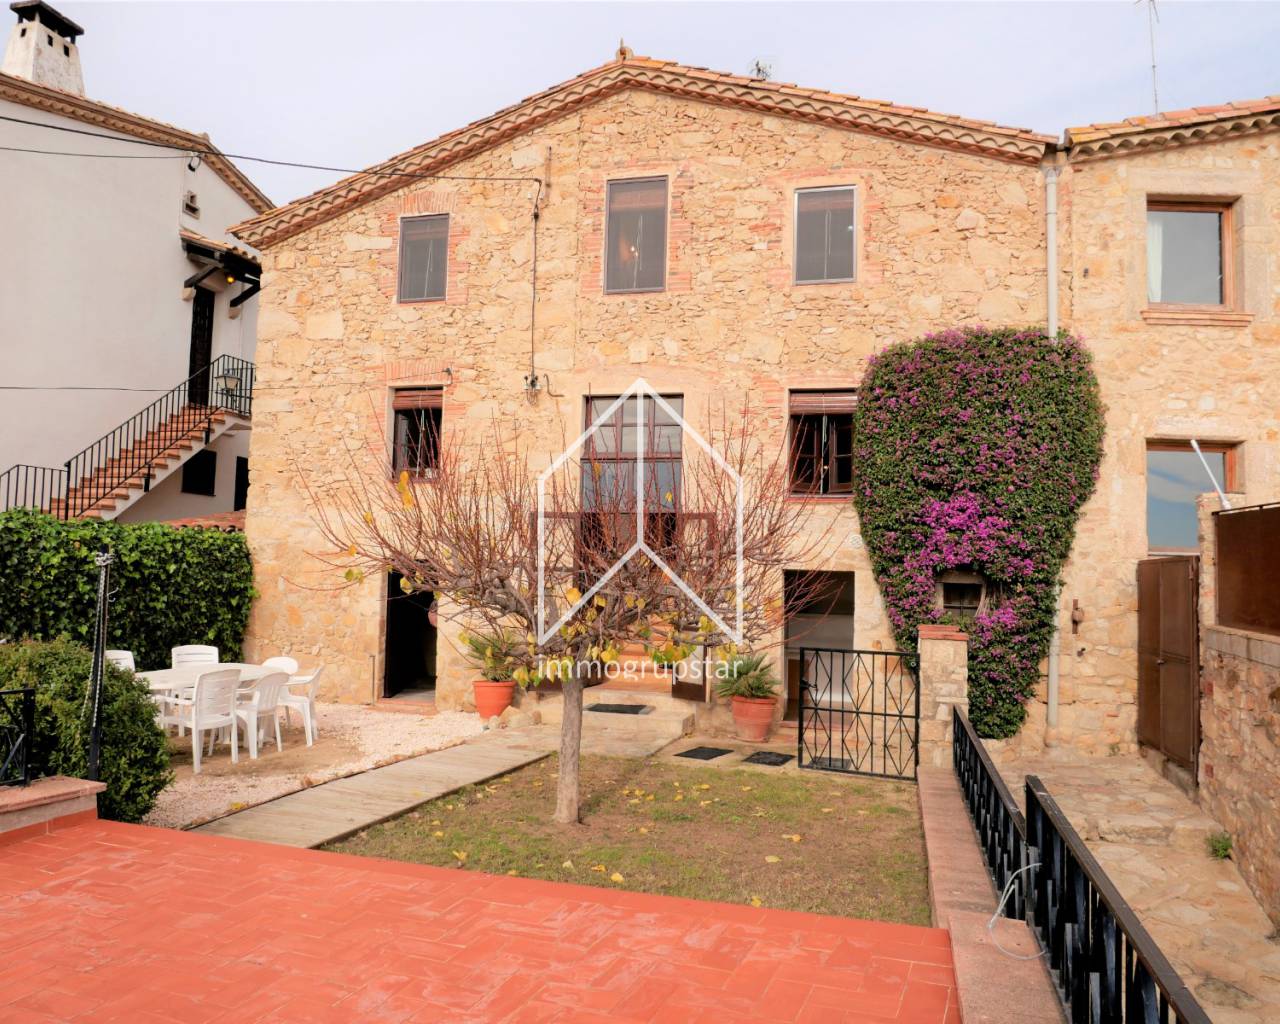 Country house-Masia - Resale - Castell D'aro - Castell-Platja D'aro